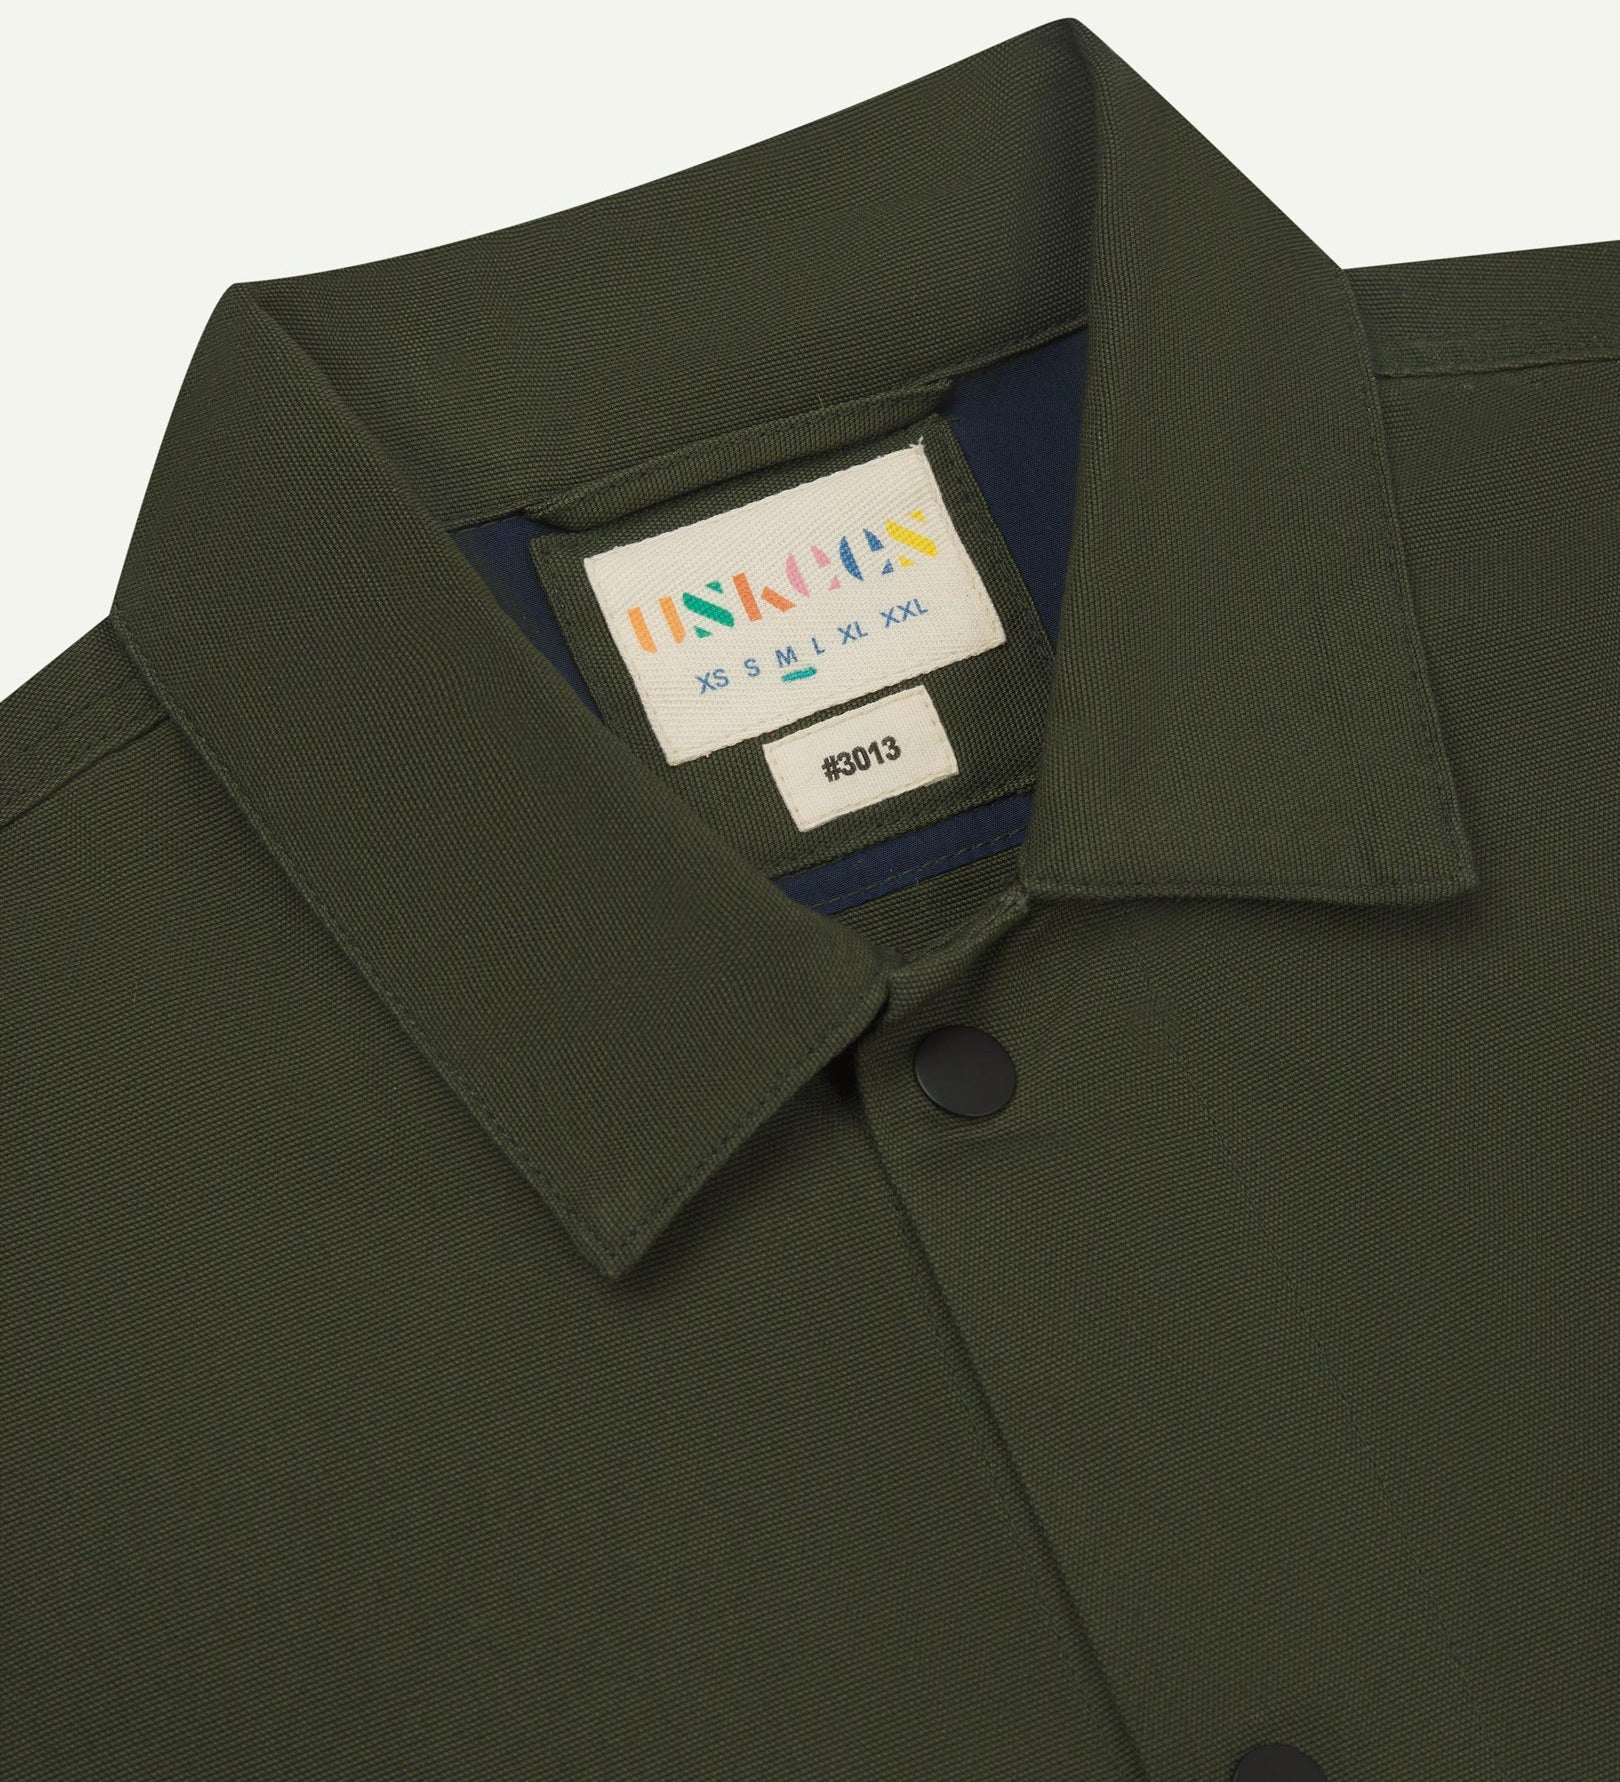 Neck view of Uskees 3013 vine green organic cotton coach jacket with focus on collar, contrast inner yoke, Uskees brand label and popper buttons.